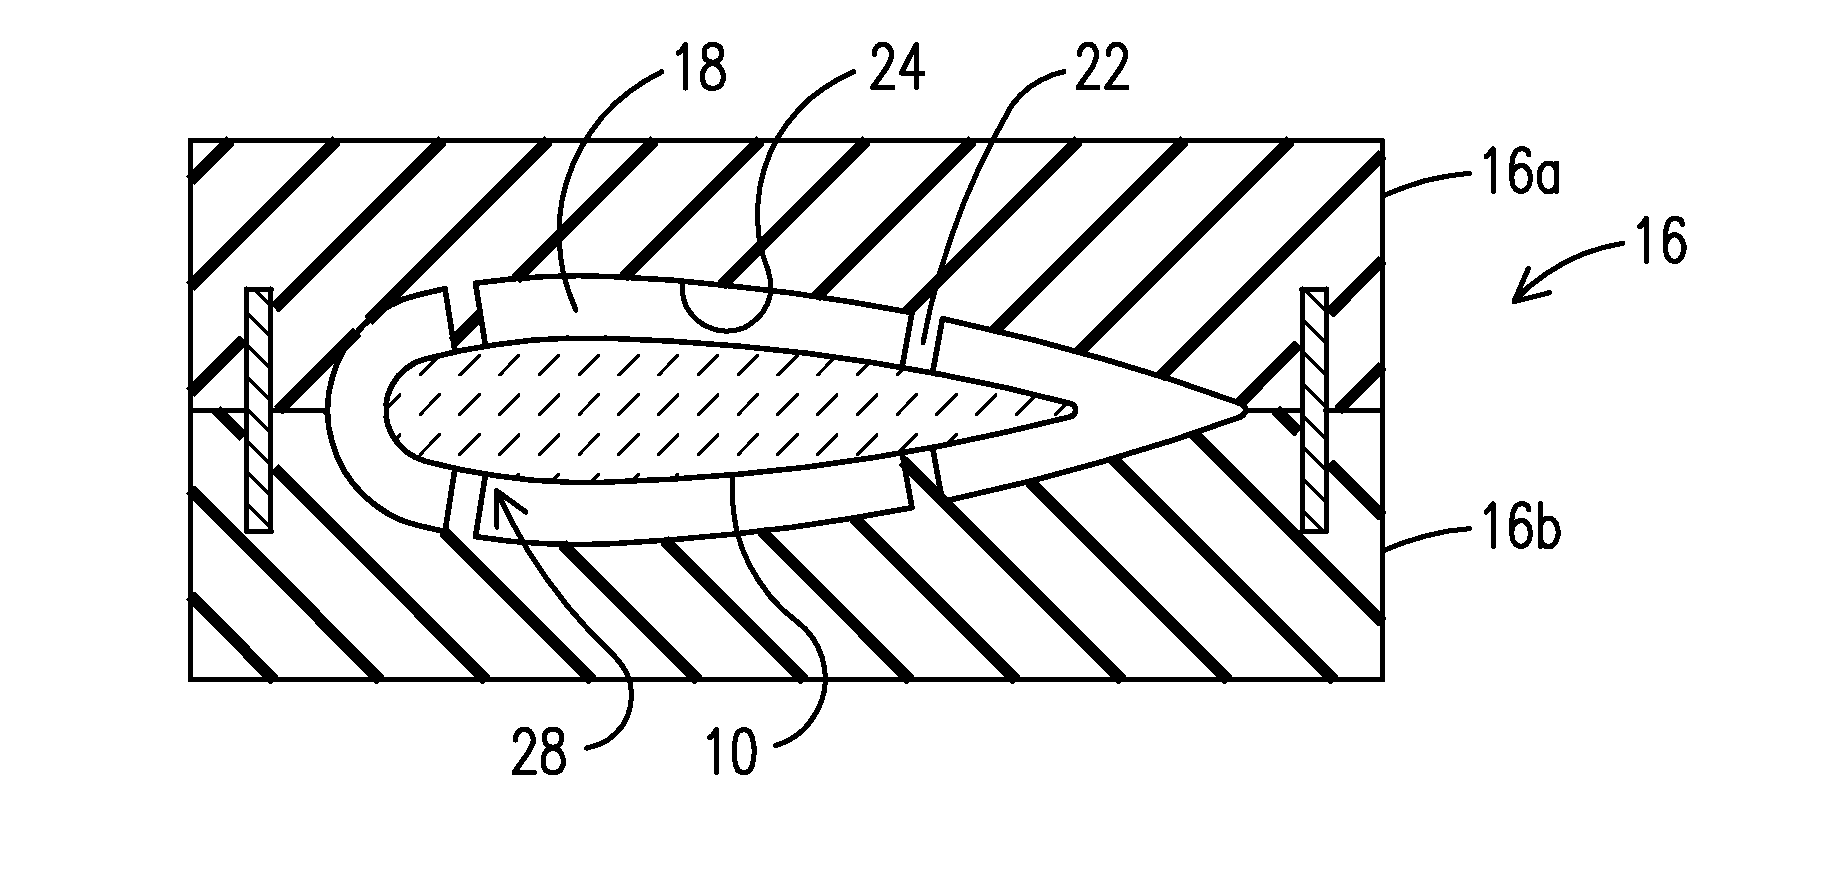 Investment casting utilizing flexible wax pattern tool for supporting a ceramic core along its length during wax injection